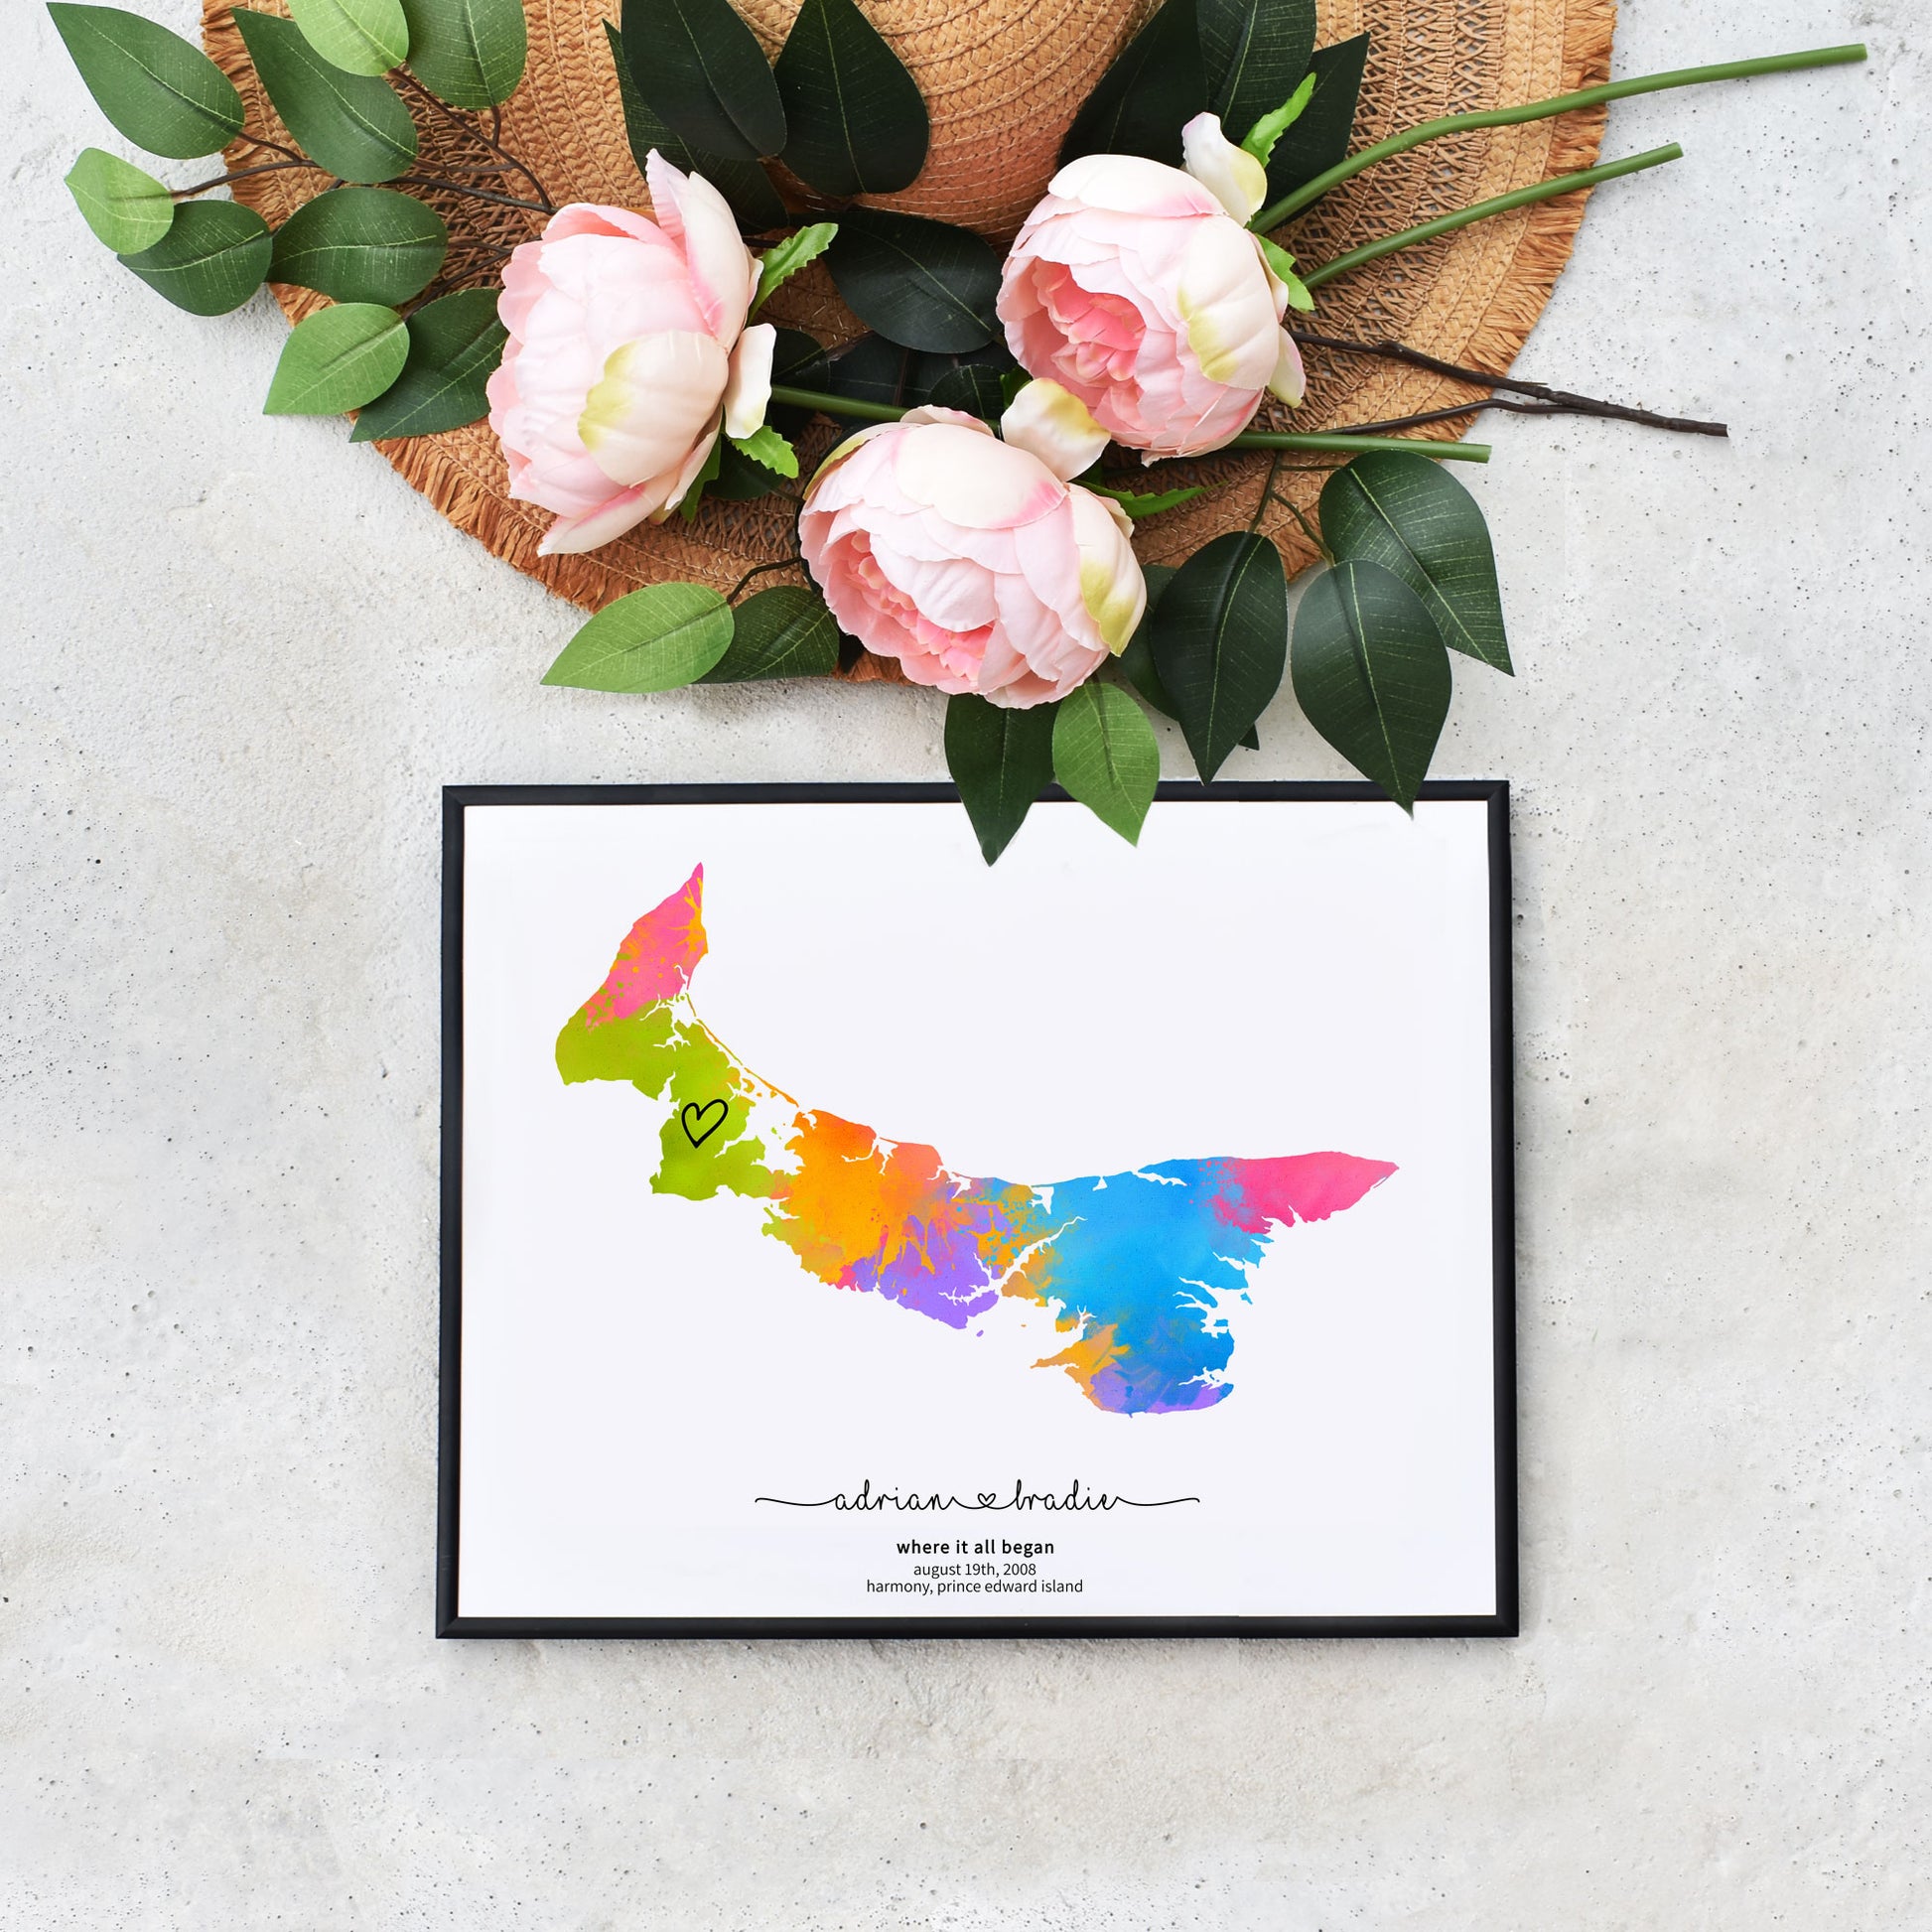 Easy Self Editable PEI Milestone Map Personalized Gift for Her